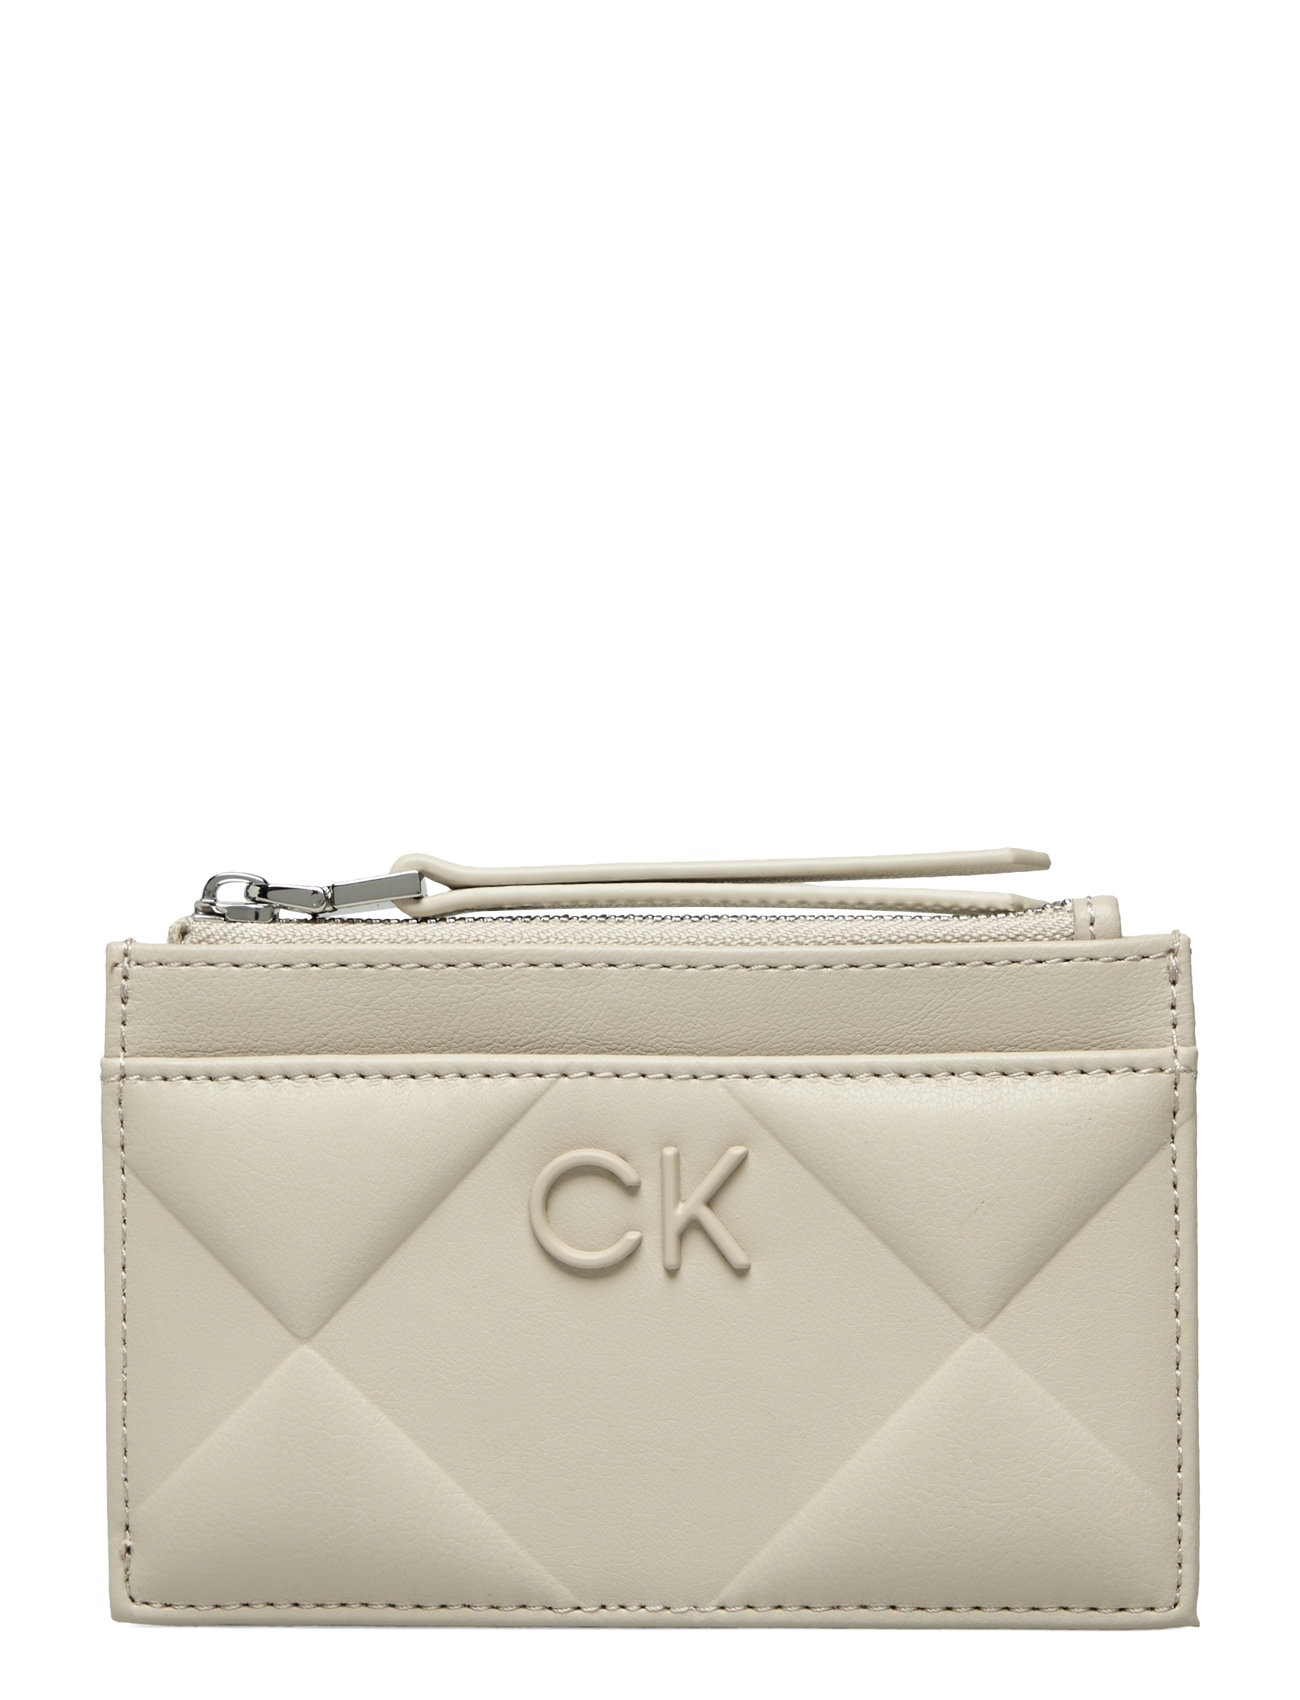 Quilt Cardholder With Zip Bags Card Holders & Wallets Card Holder Cream Calvin Klein